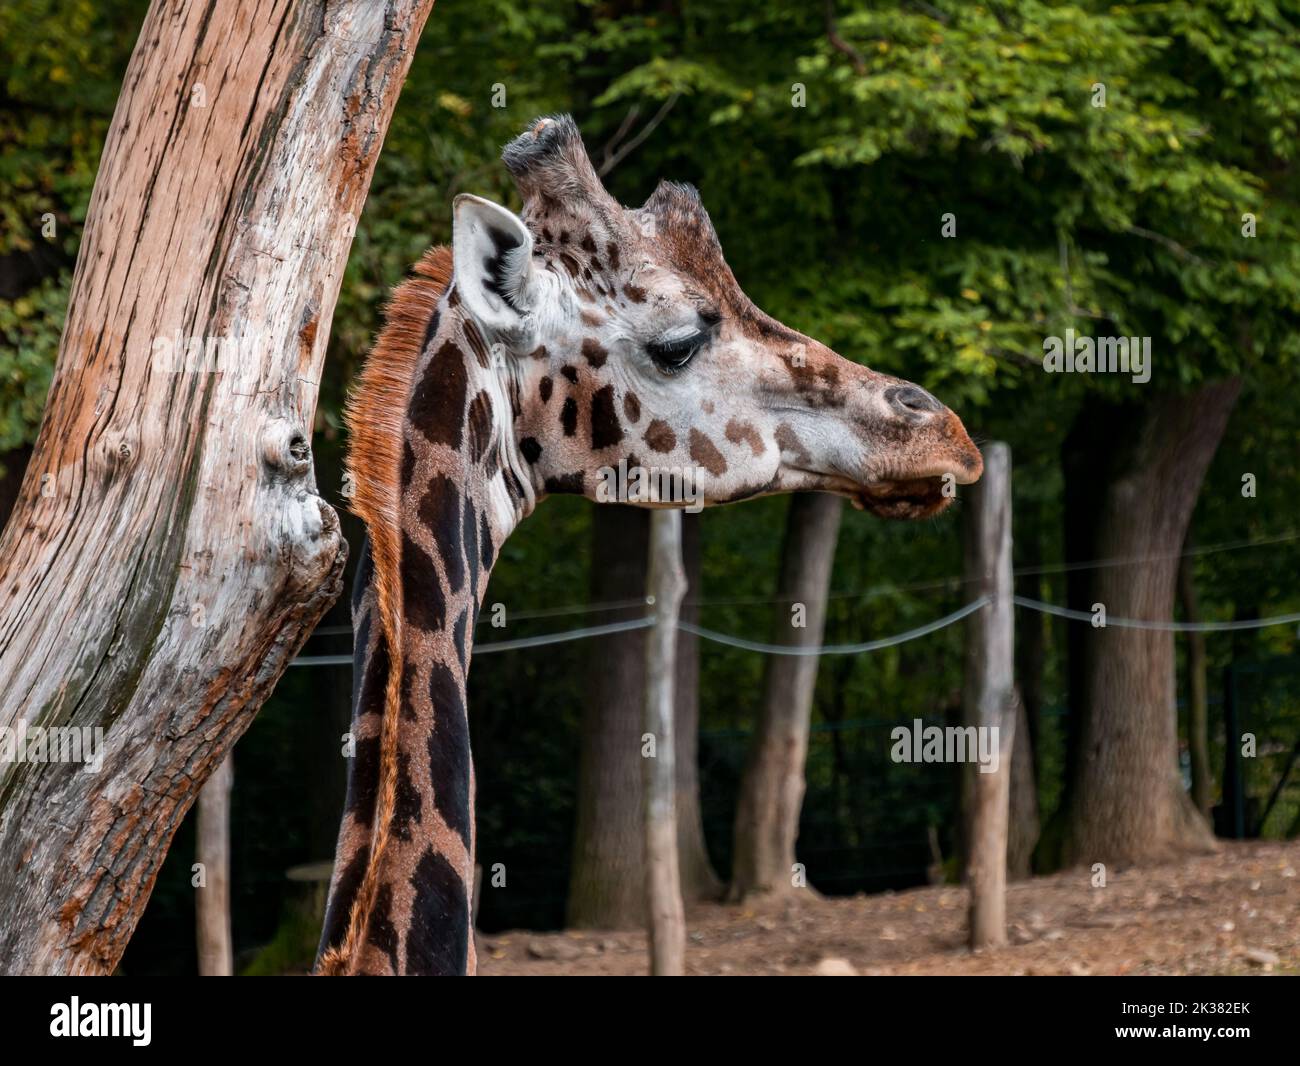 Giraffe and her head looking into the distance in the zoo. Stock Photo